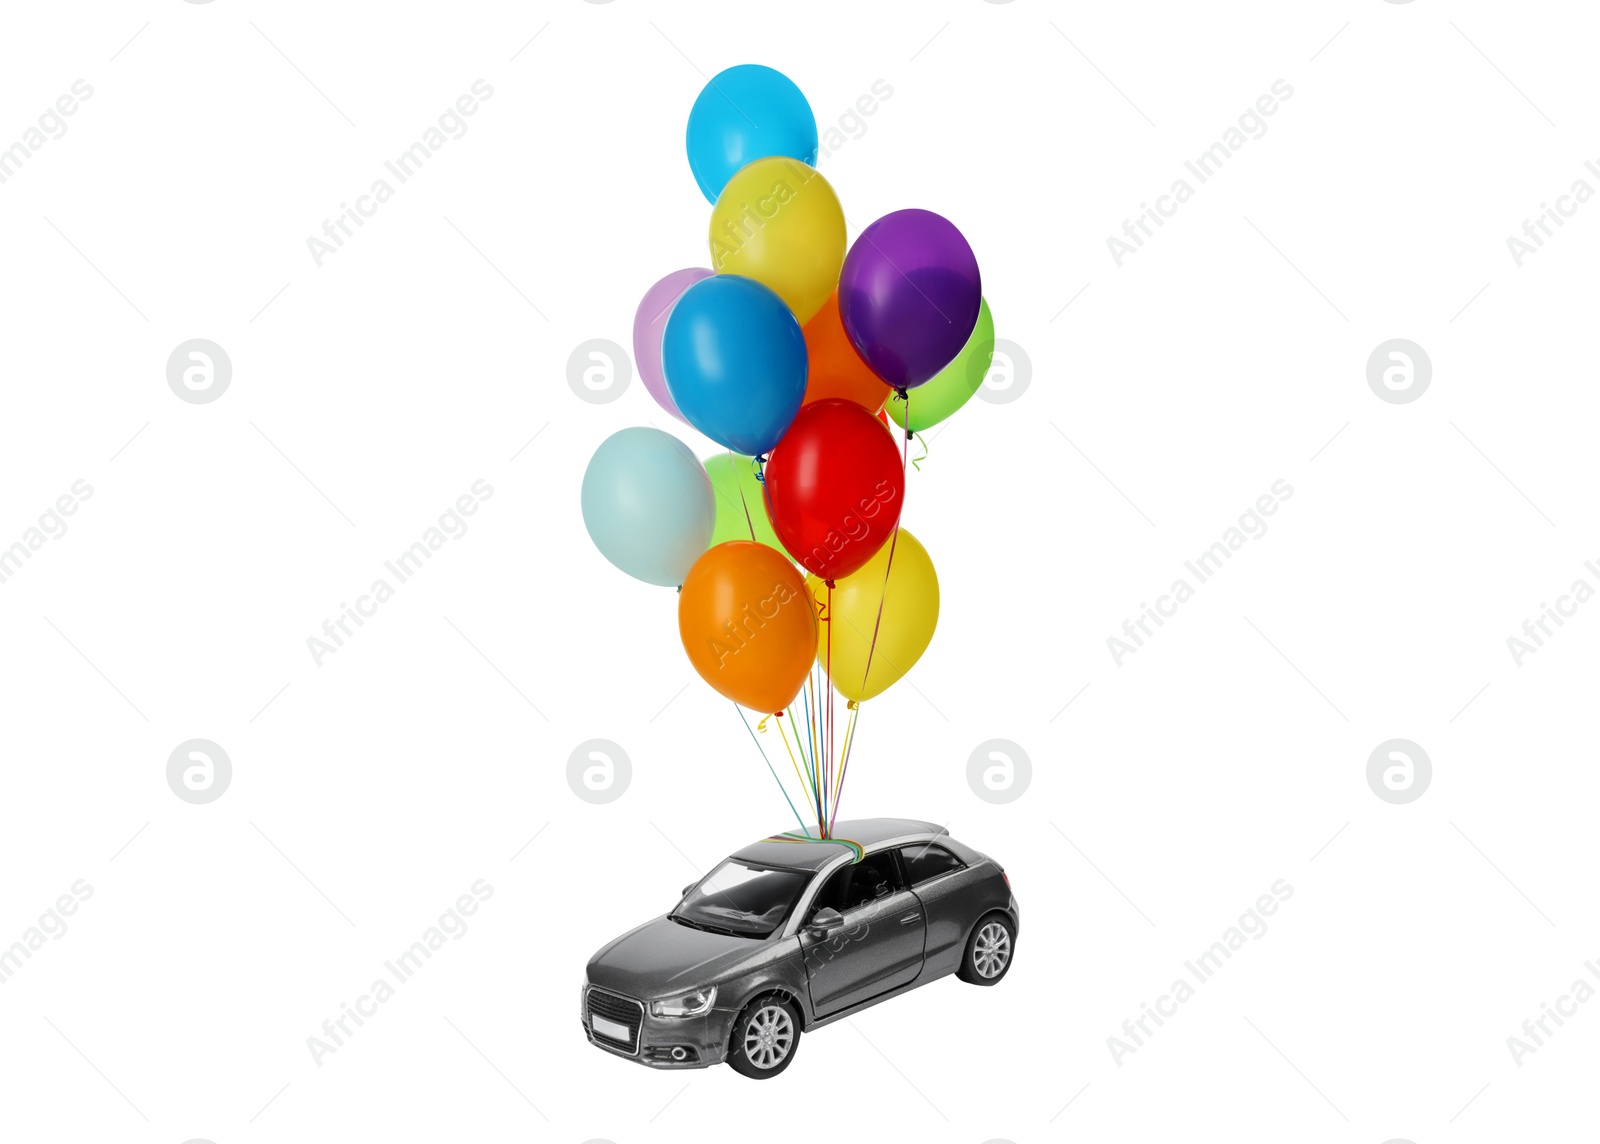 Image of Many balloons tied to toy car flying on white background